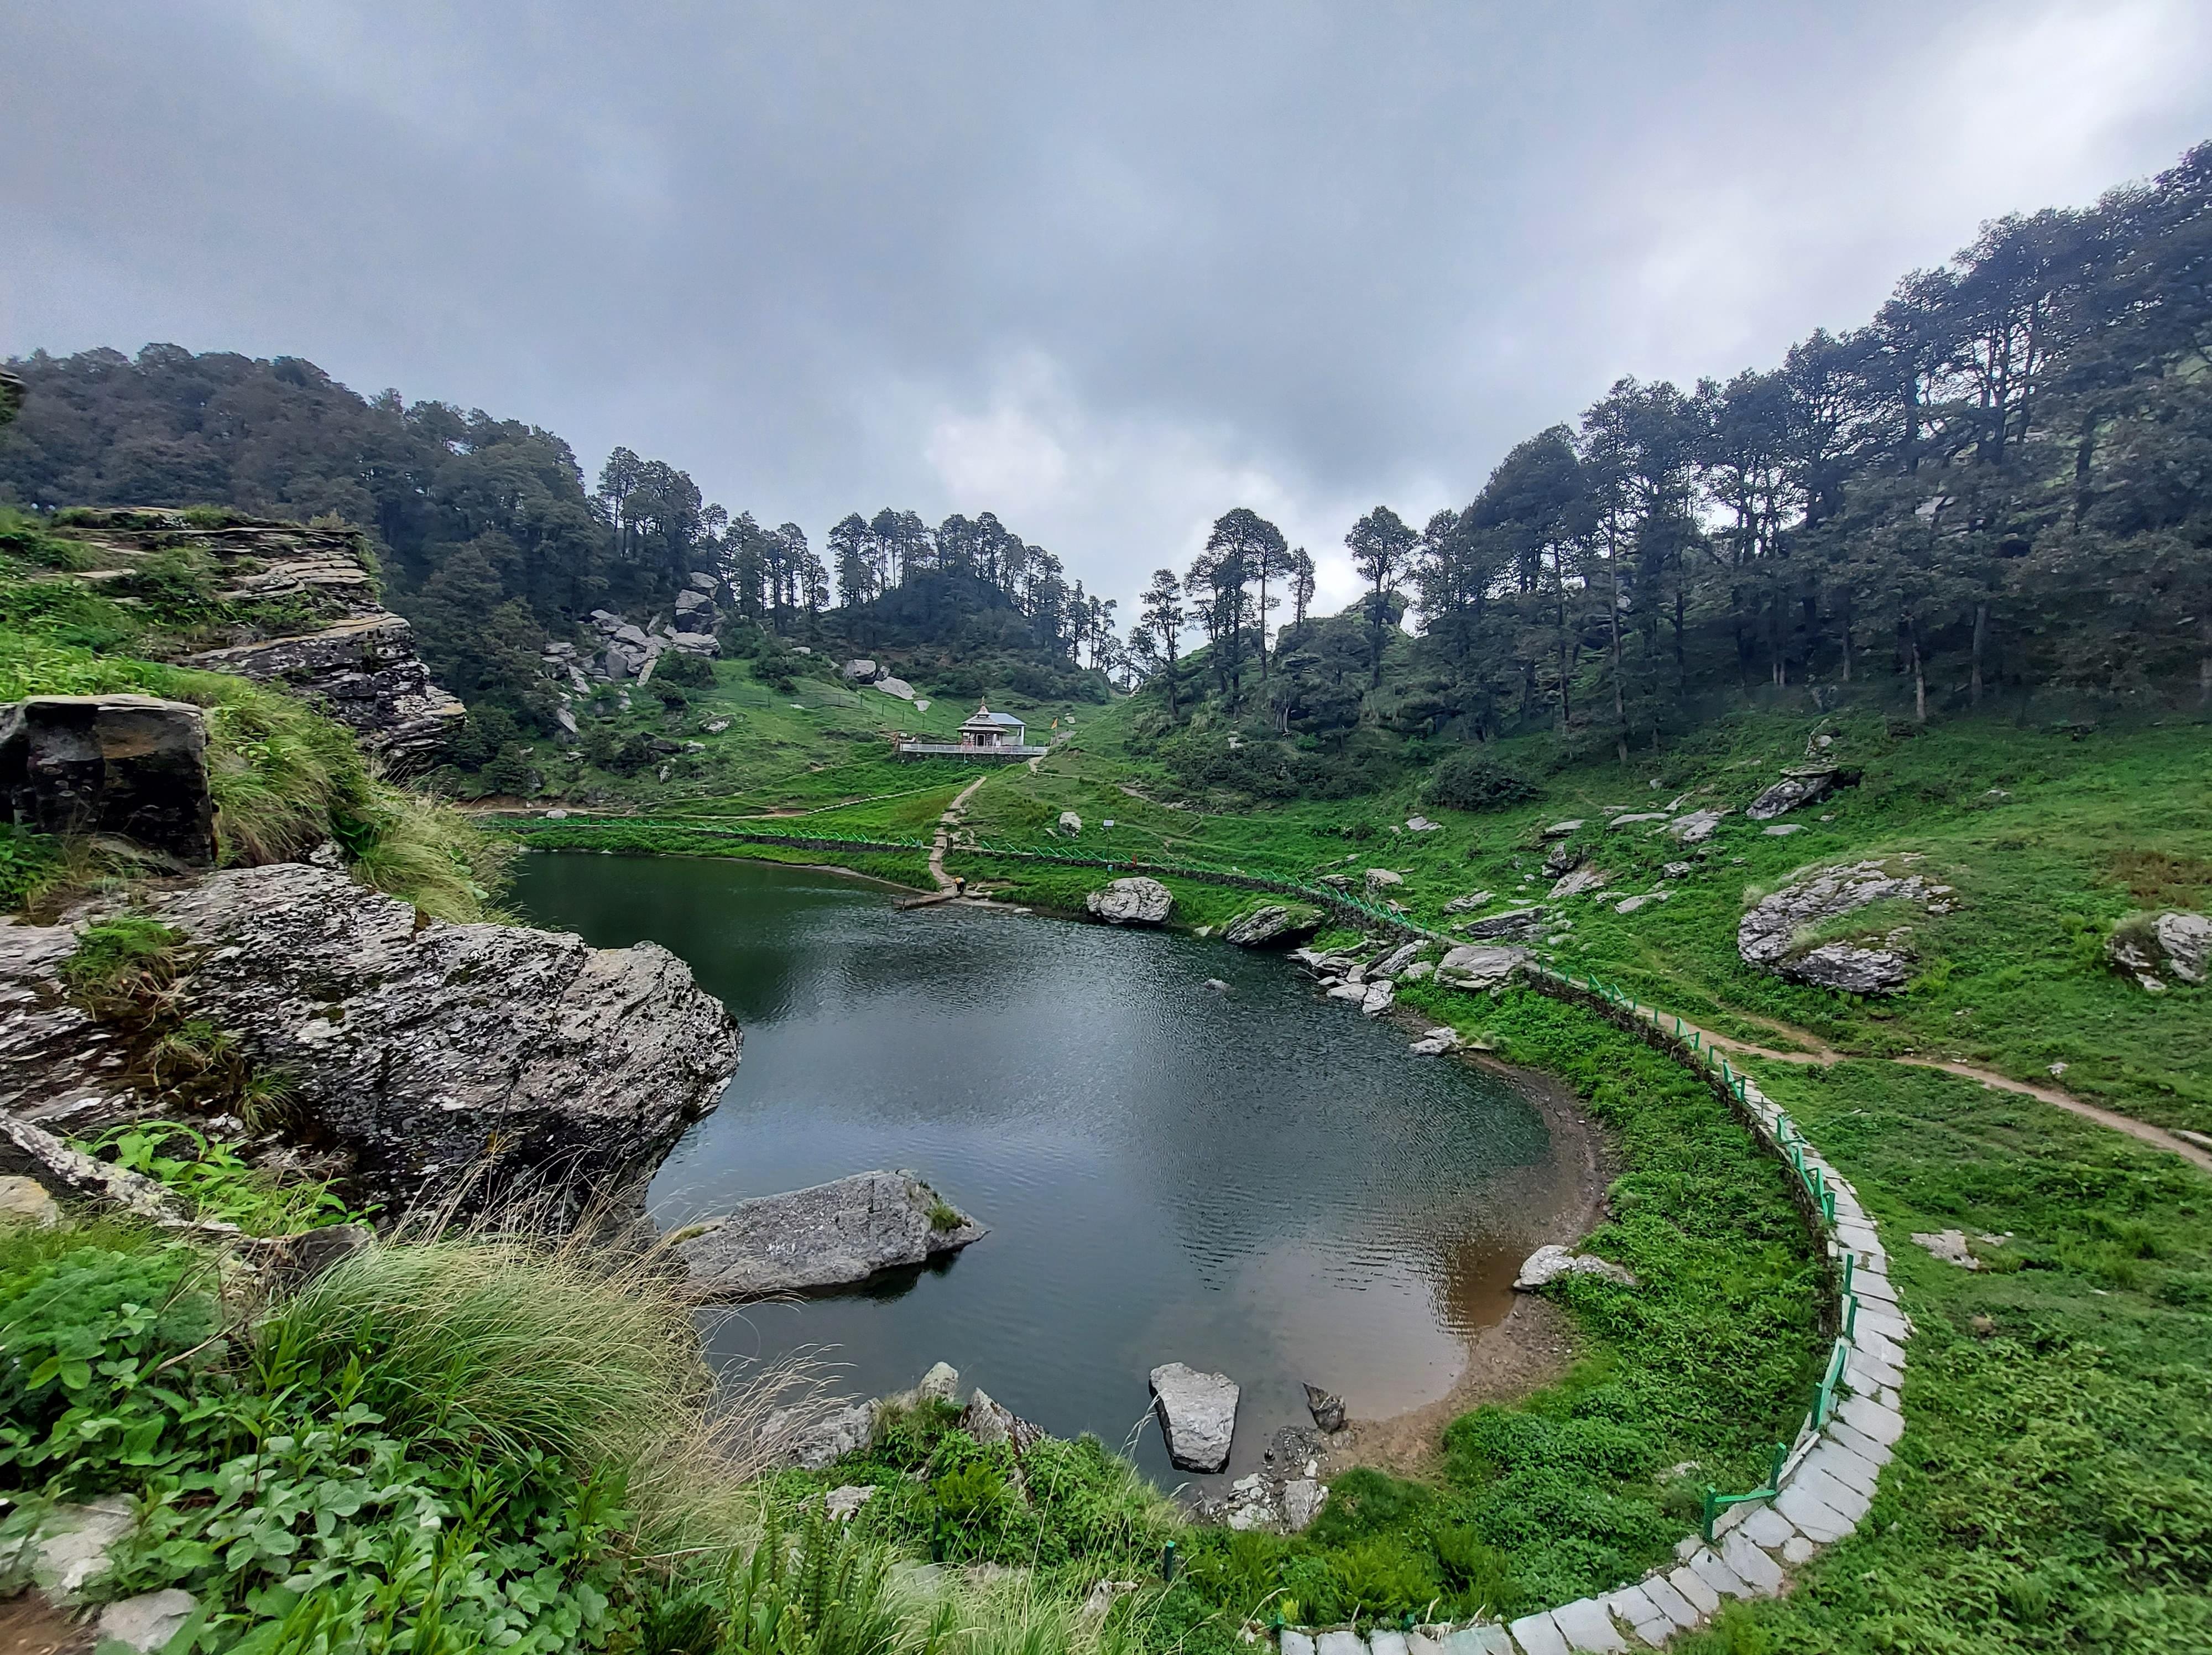 Dhanaulti Packages from Chandigarh | Get Upto 40% Off